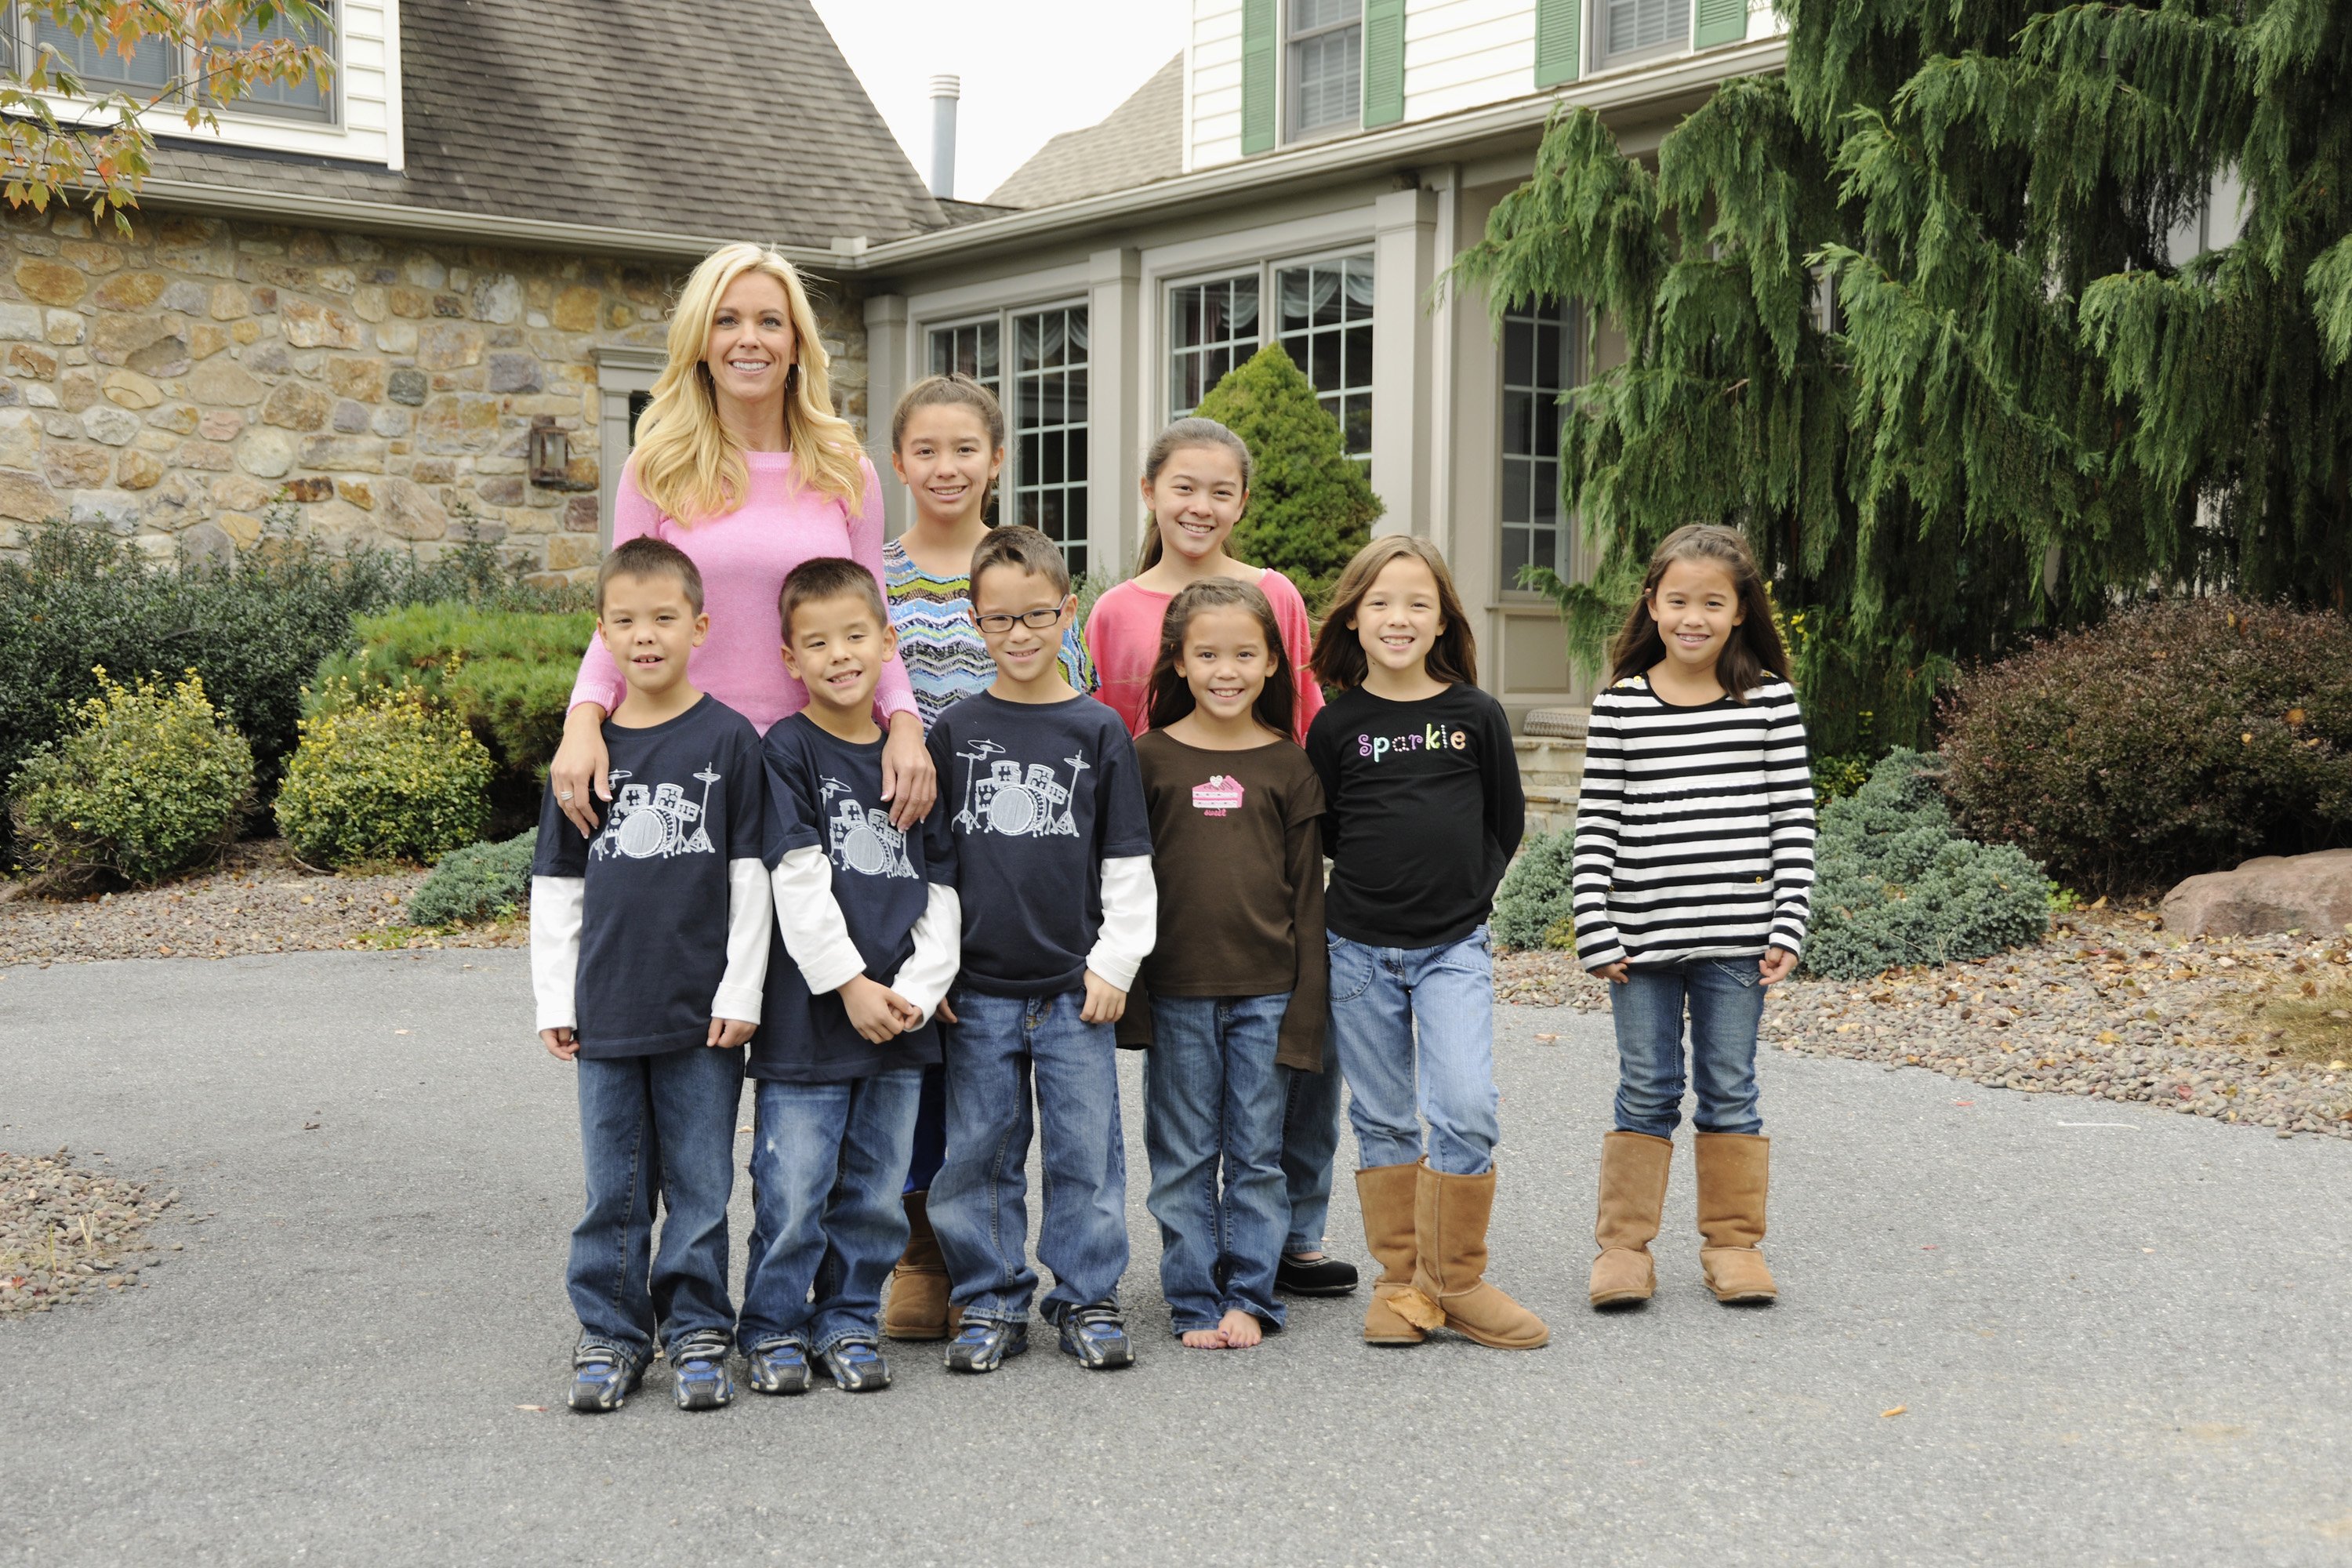 Kate Gosselin with her twins and sextuplets with ex-husband Jon Gosselin in October 2012. | Source: Getty Images.